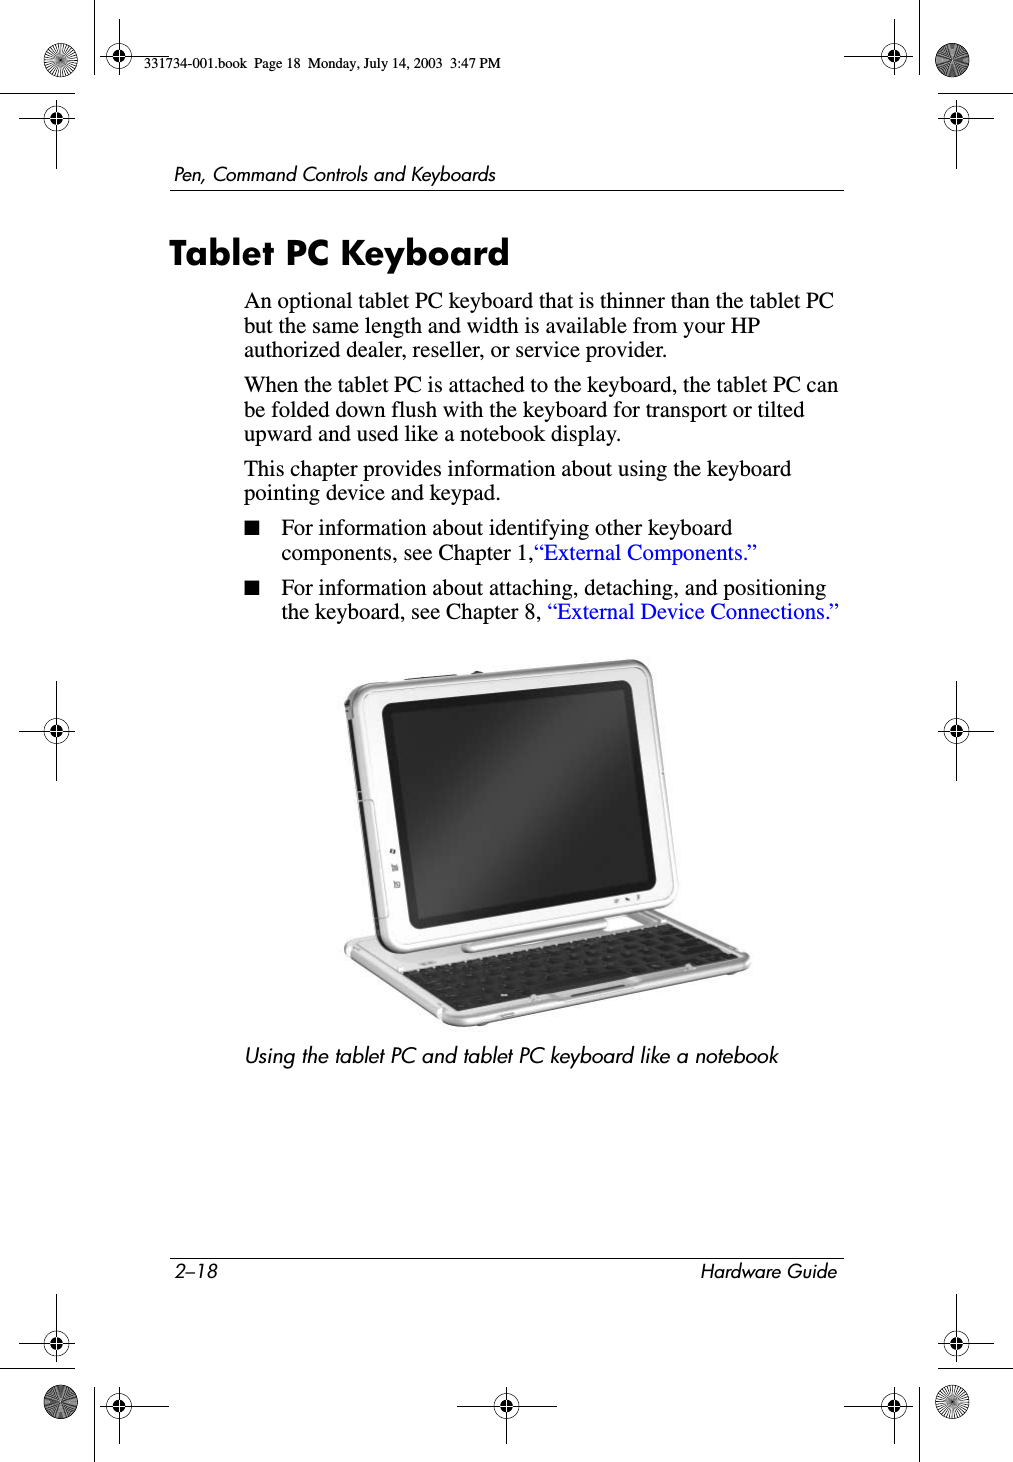 2–18 Hardware GuidePen, Command Controls and KeyboardsTablet PC KeyboardAn optional tablet PC keyboard that is thinner than the tablet PC but the same length and width is available from your HP authorized dealer, reseller, or service provider.When the tablet PC is attached to the keyboard, the tablet PC can be folded down flush with the keyboard for transport or tilted upward and used like a notebook display.This chapter provides information about using the keyboard pointing device and keypad.■For information about identifying other keyboard components, see Chapter 1,“External Components.”■For information about attaching, detaching, and positioning the keyboard, see Chapter 8, “External Device Connections.”Using the tablet PC and tablet PC keyboard like a notebook331734-001.book  Page 18  Monday, July 14, 2003  3:47 PM